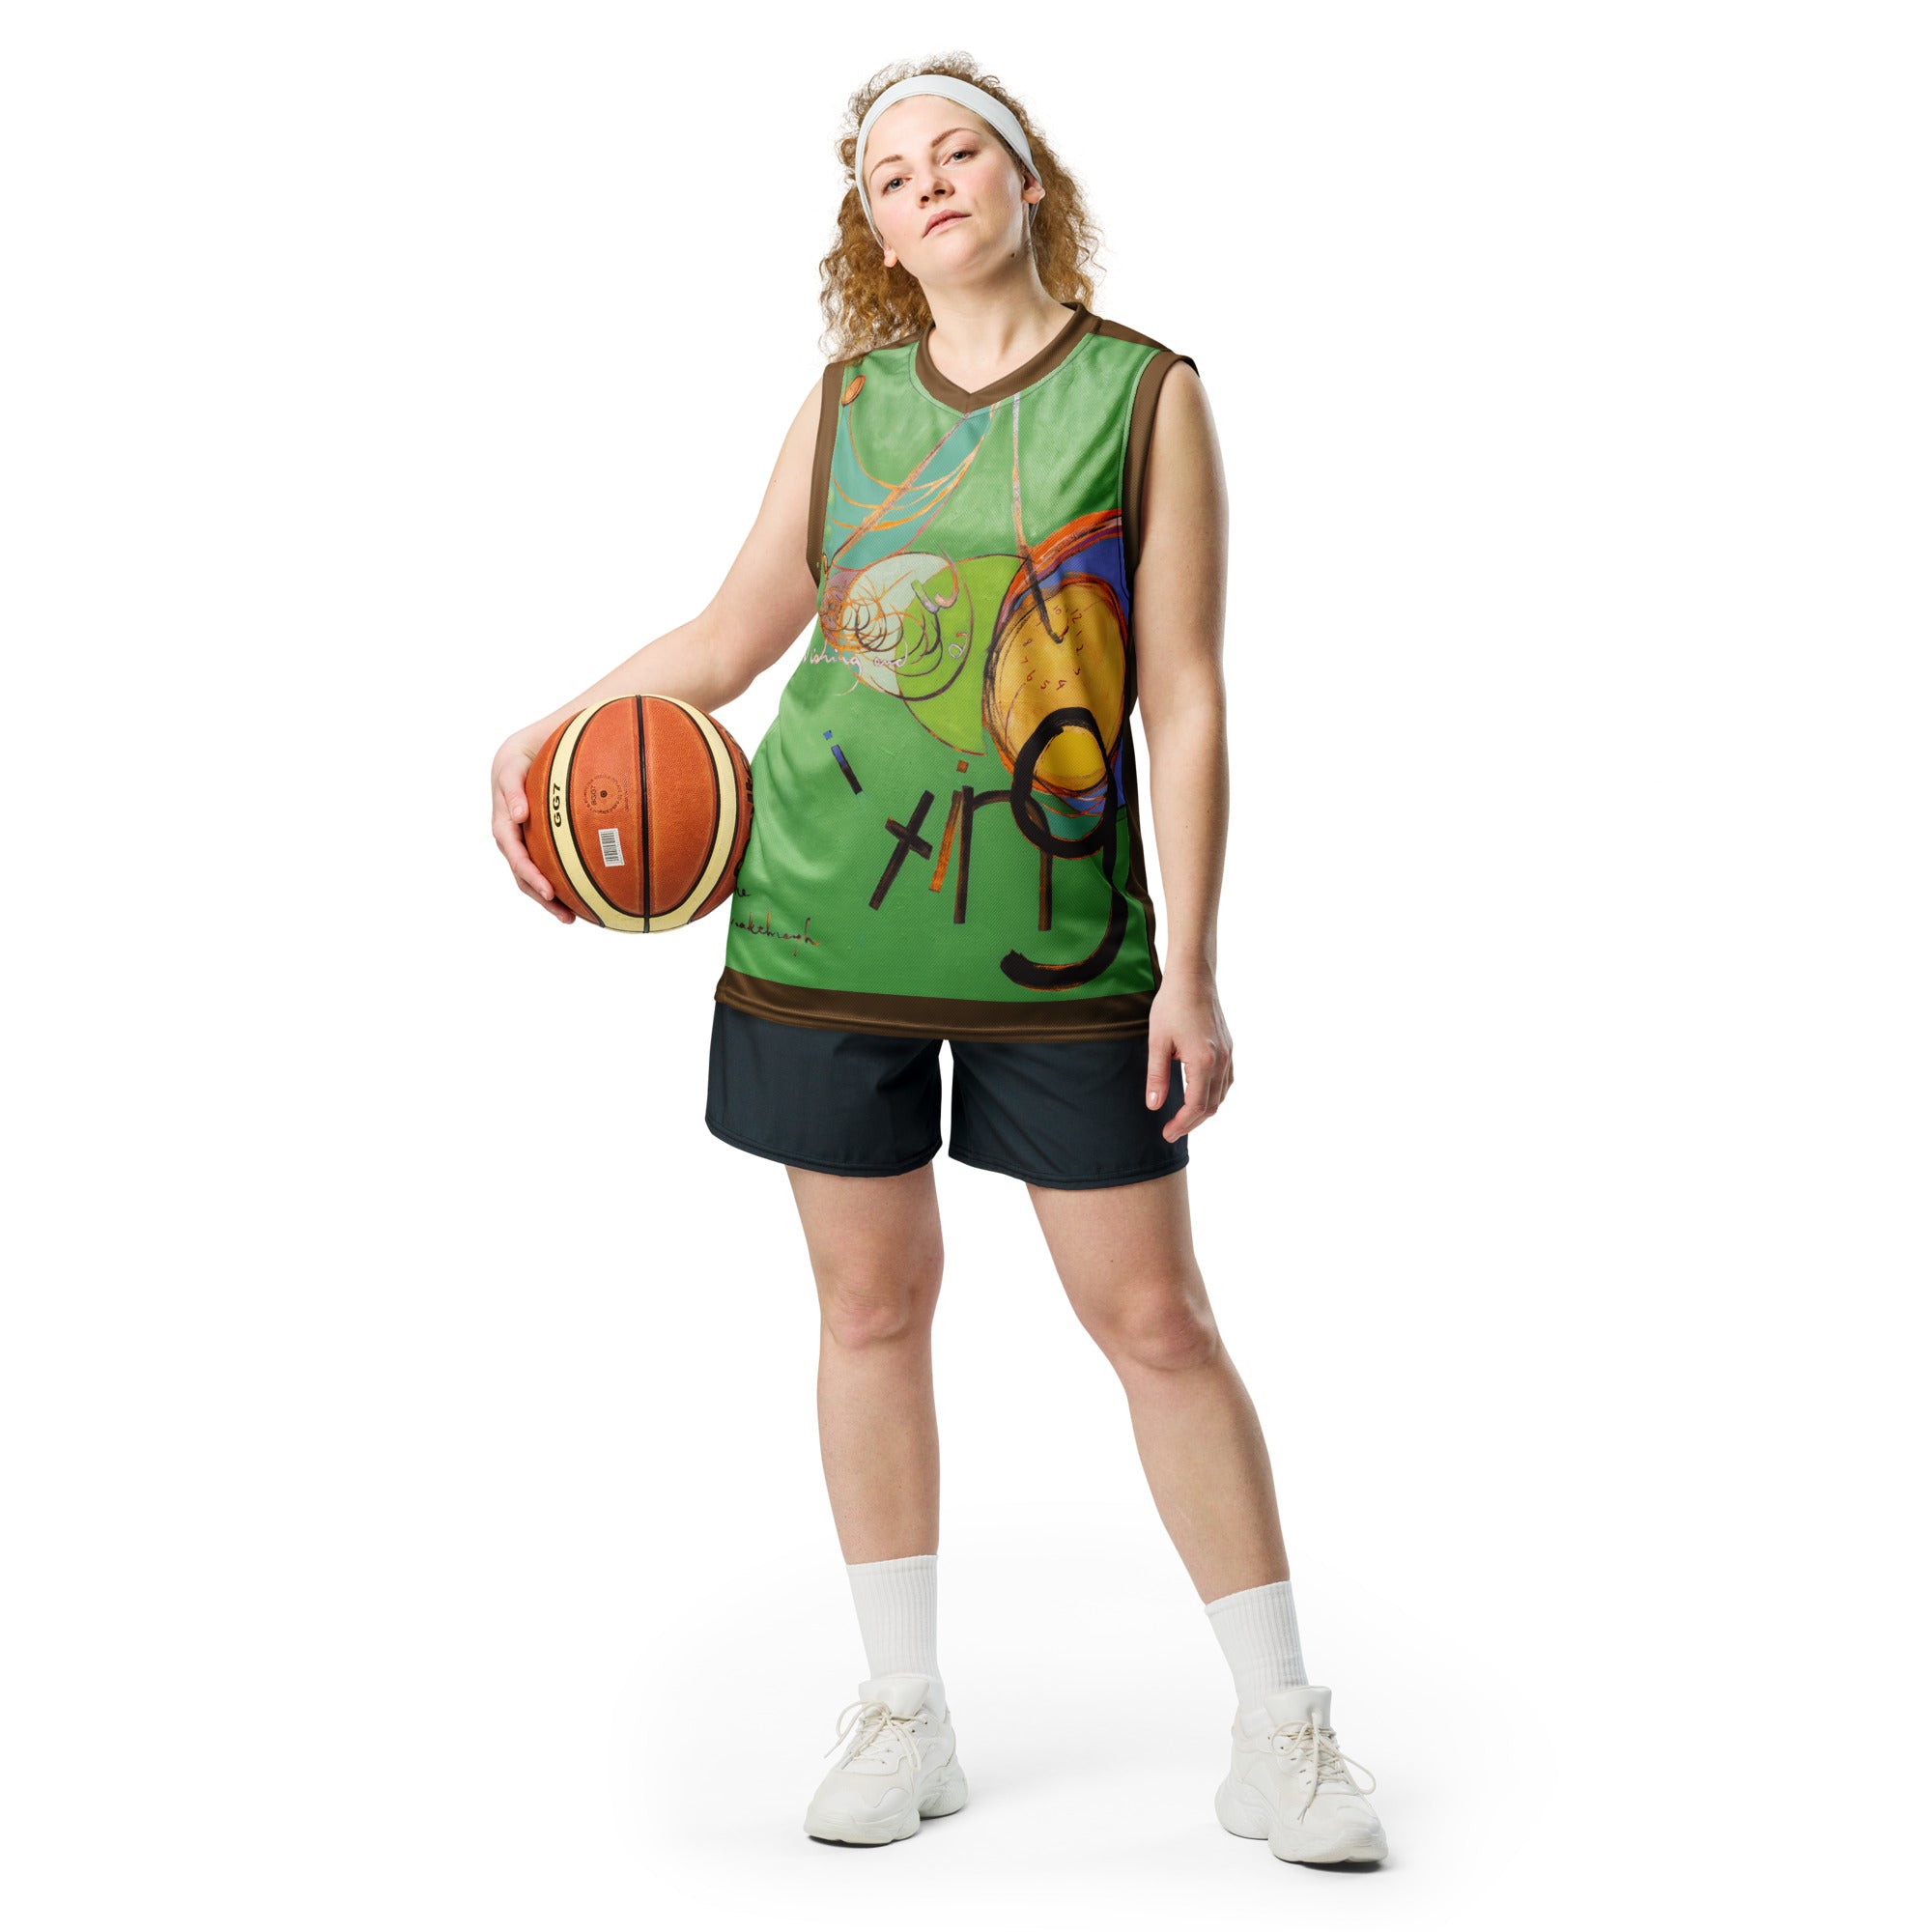 Wishing And Waiting - The Breakthrough [recycled unisex basketball jersey]